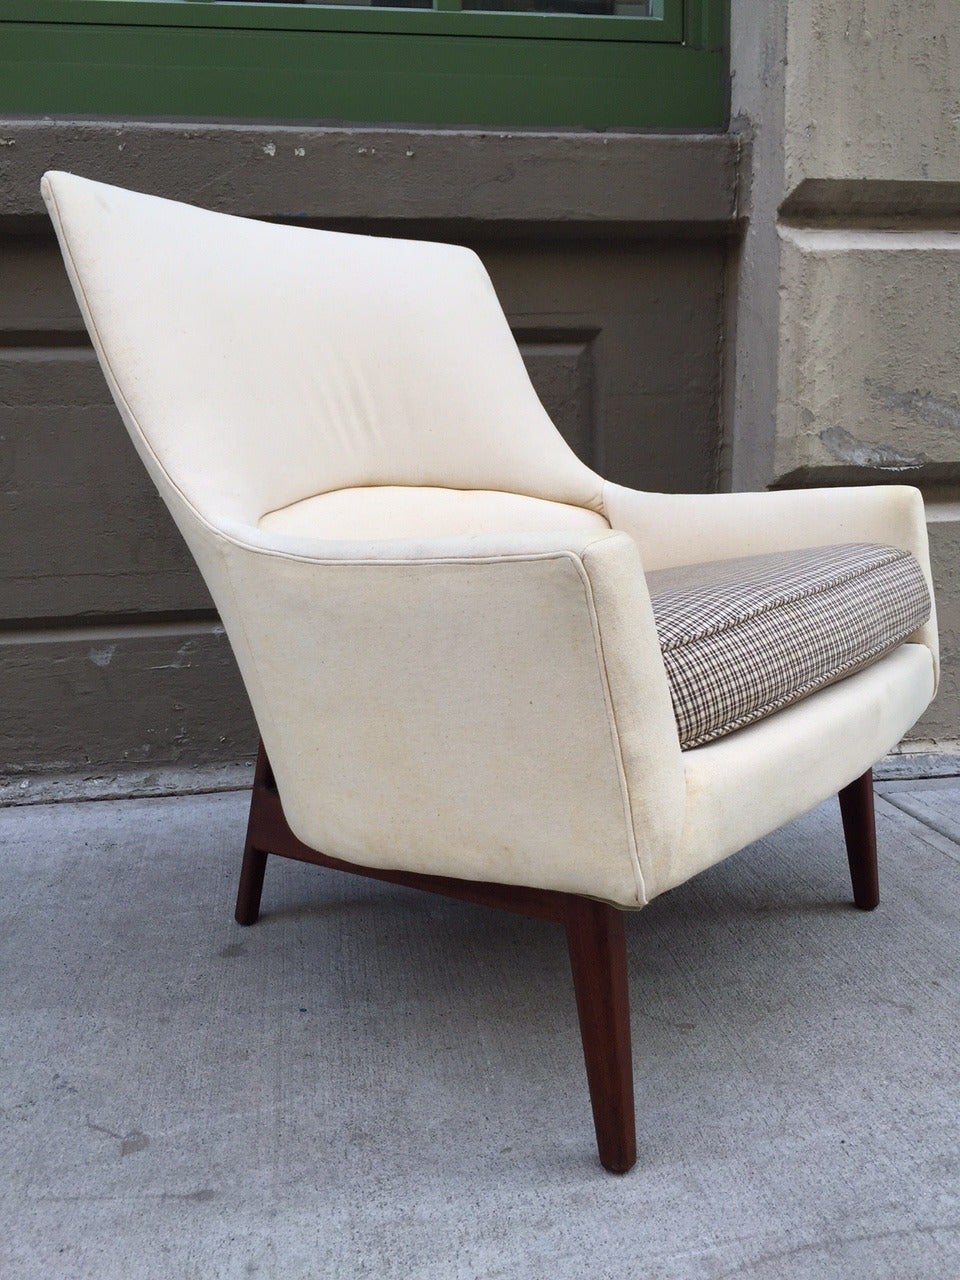 Mid-Century Modern Pair of Lounge Chairs by Jens Risom No. 2136